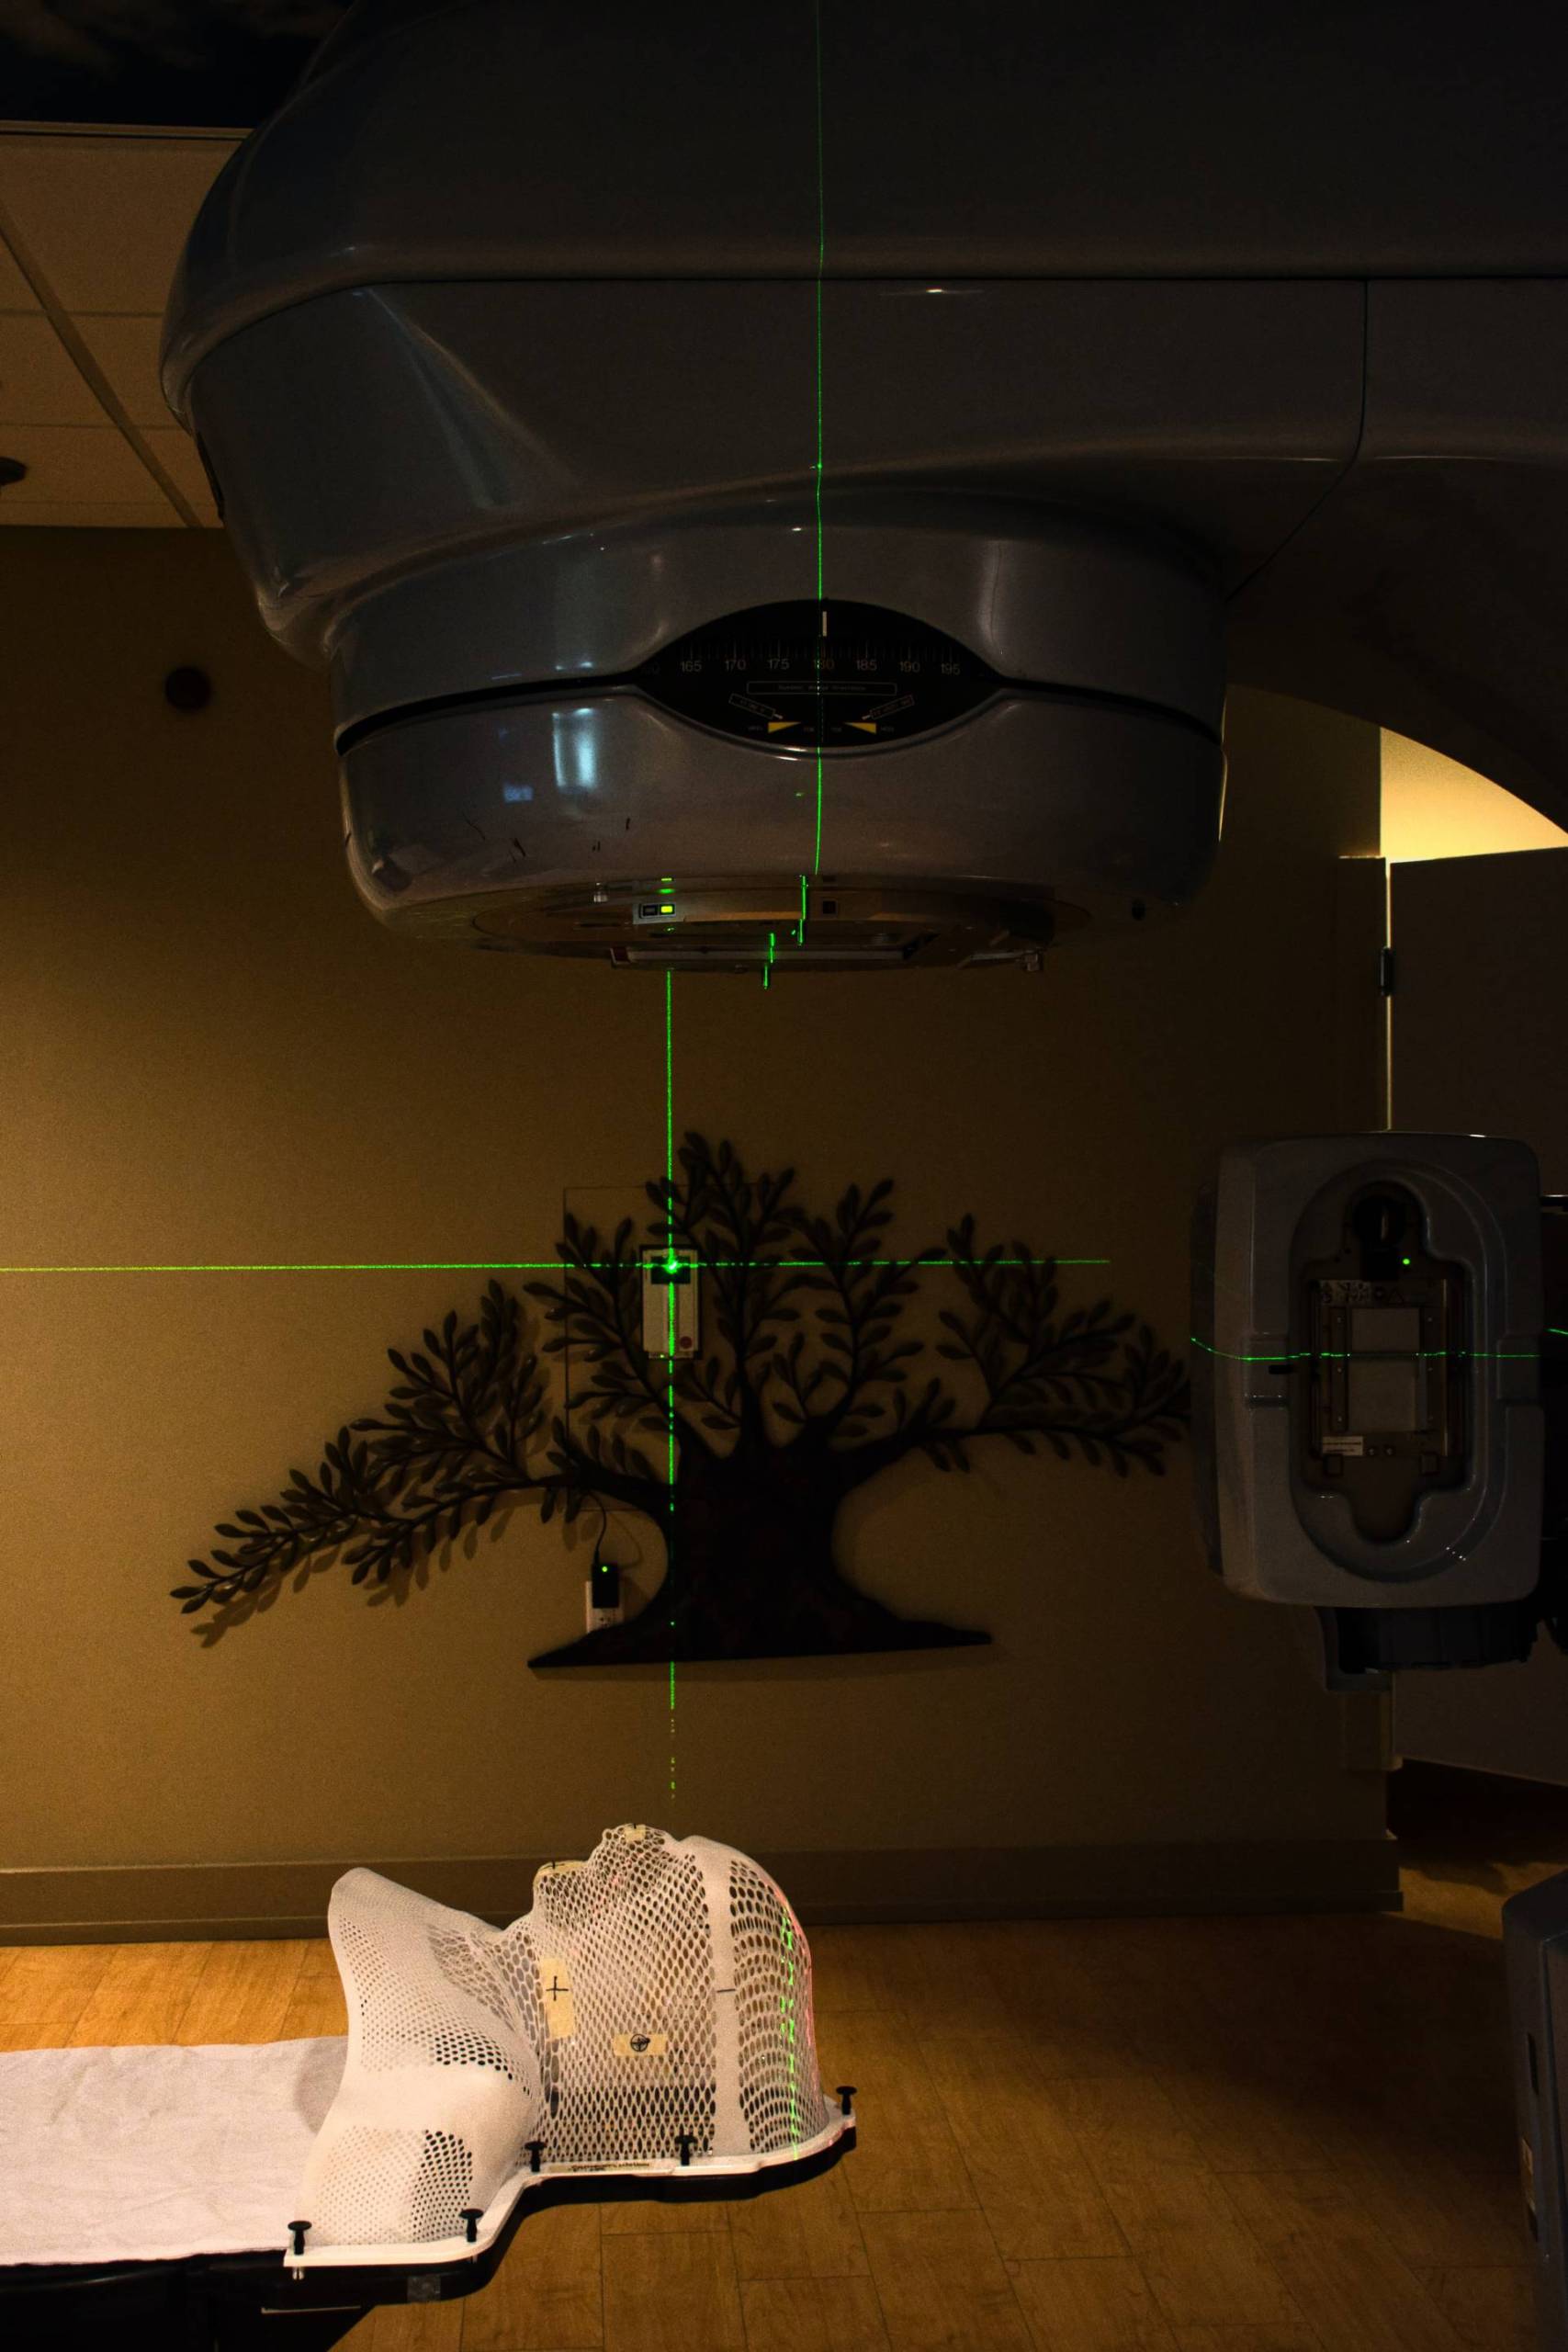 AI Technology Drastically Cuts Treatment Time for Cancer Radiotherapy - readwrite.com